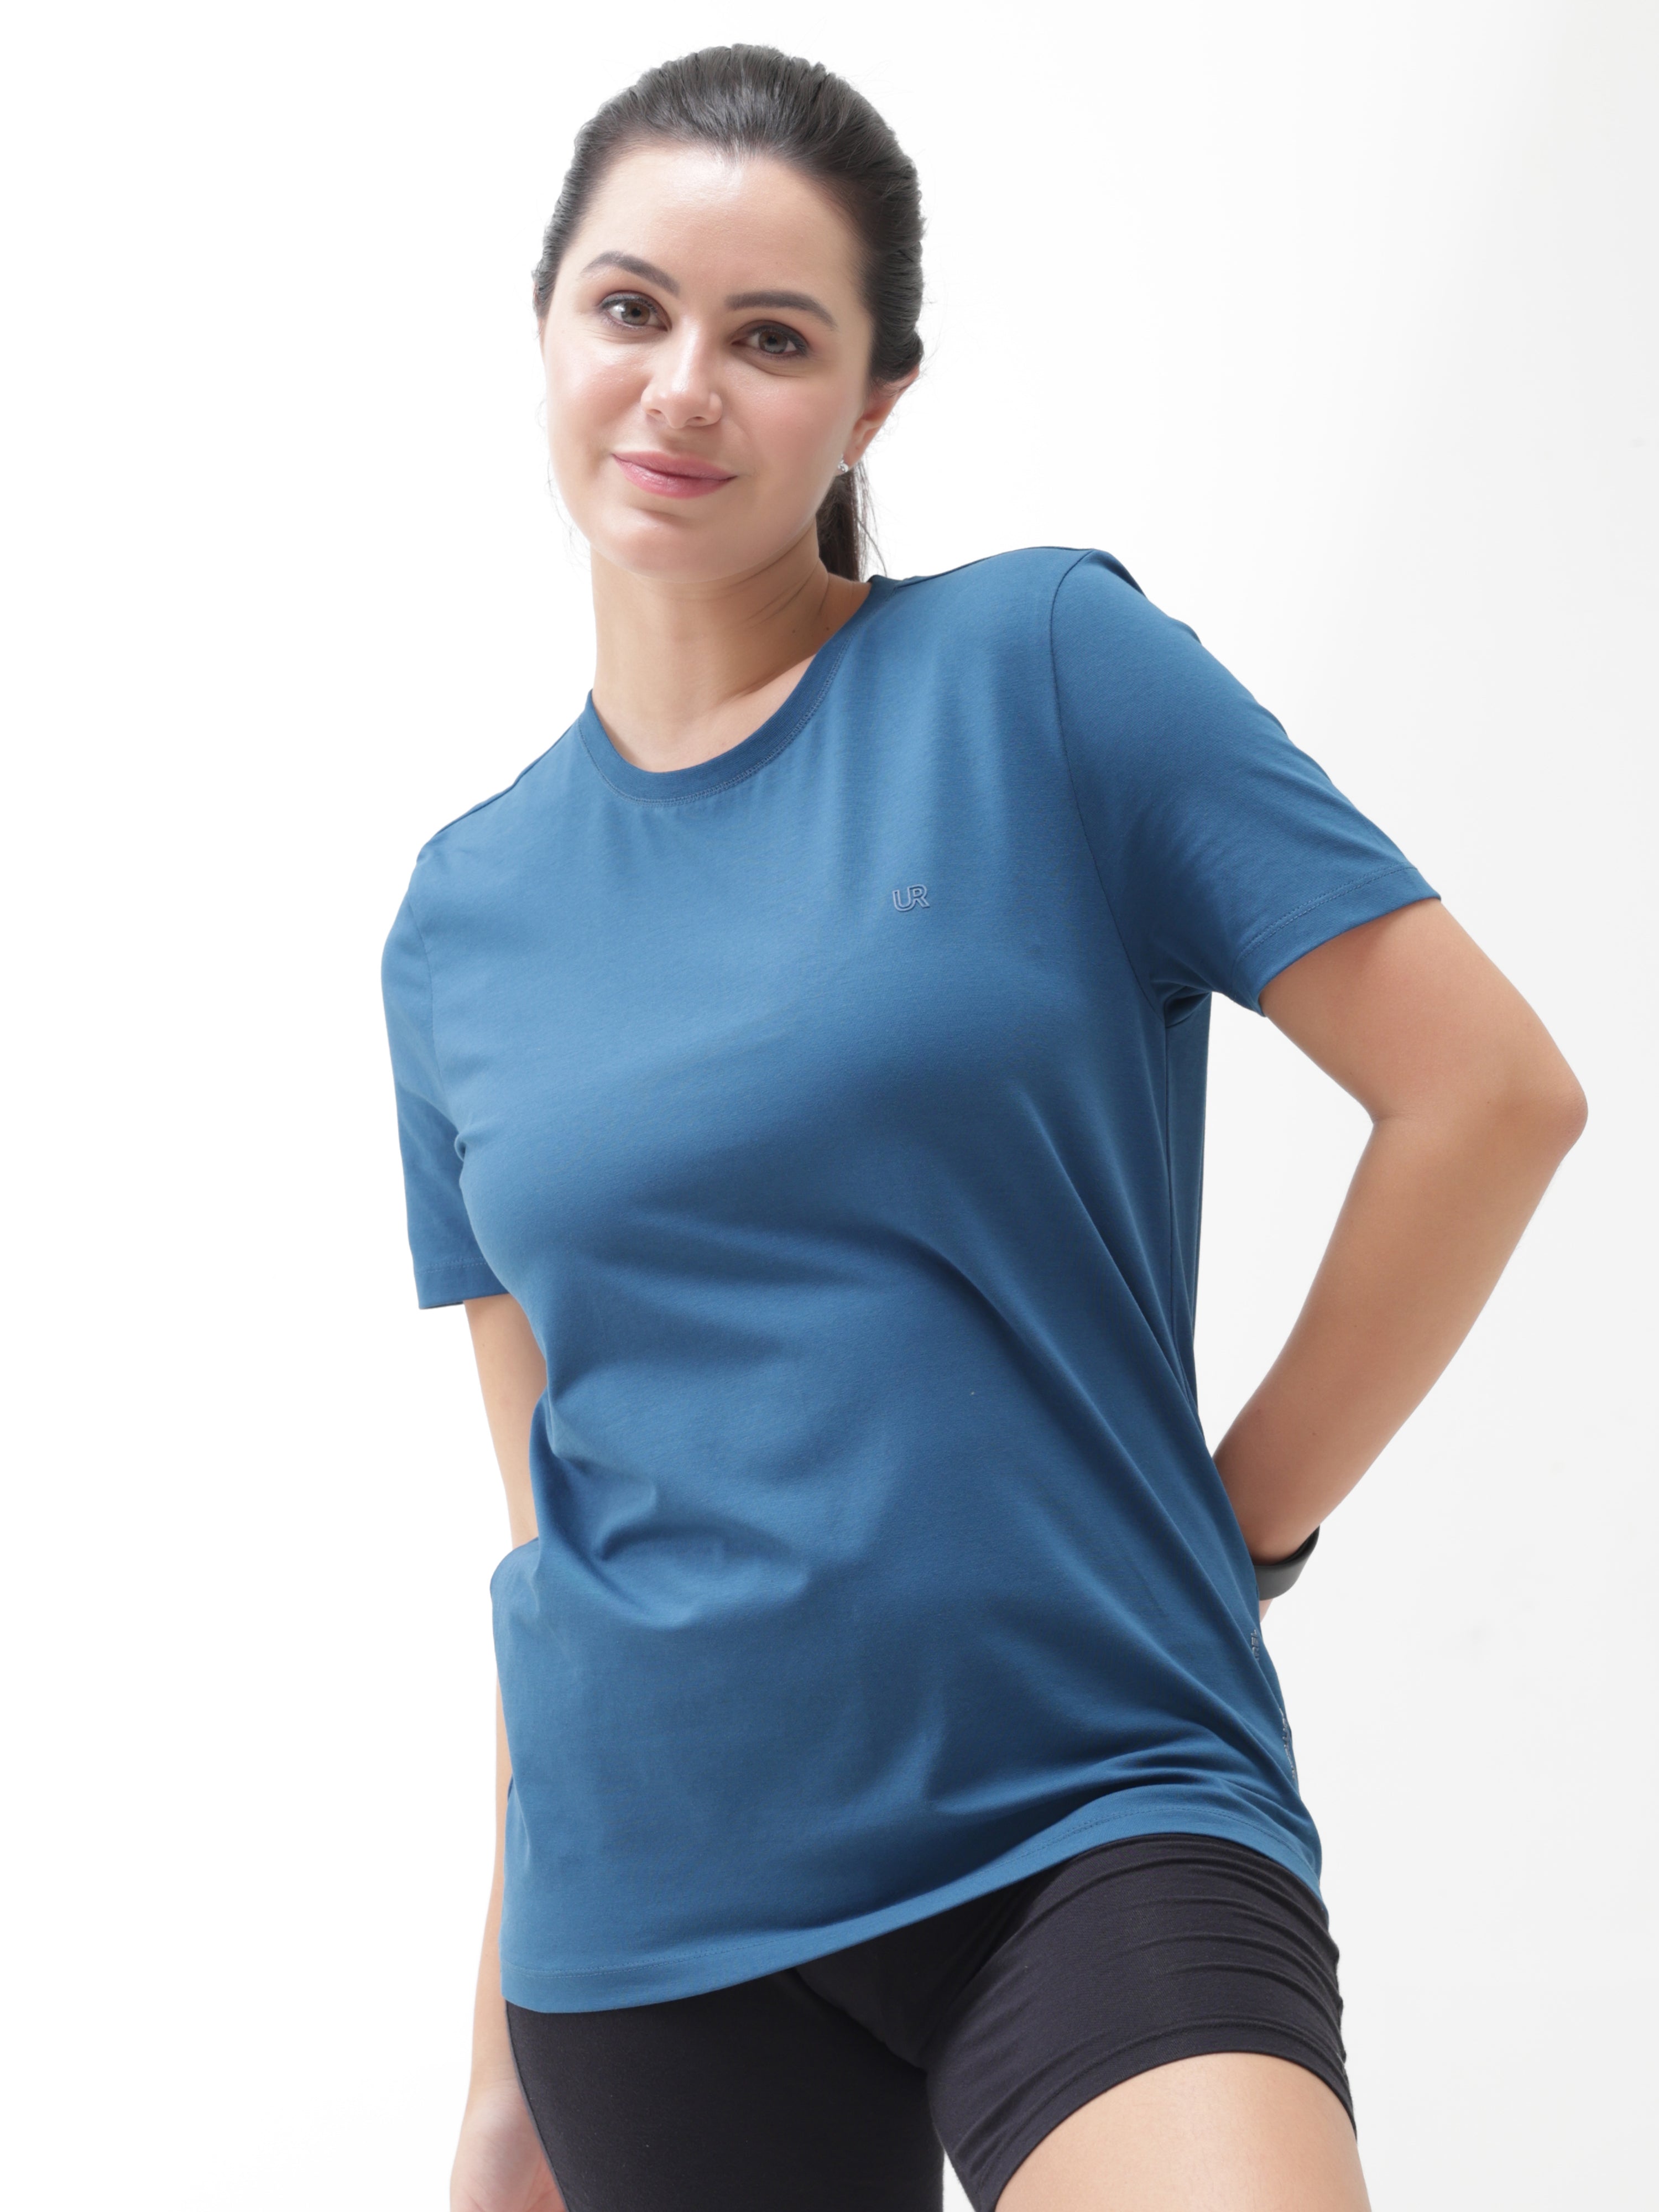 Woman wearing Sea Blue round-neck Turms T-shirt, anti stain, anti odour, stretchable, tailored fit, intelligent apparel trending best.